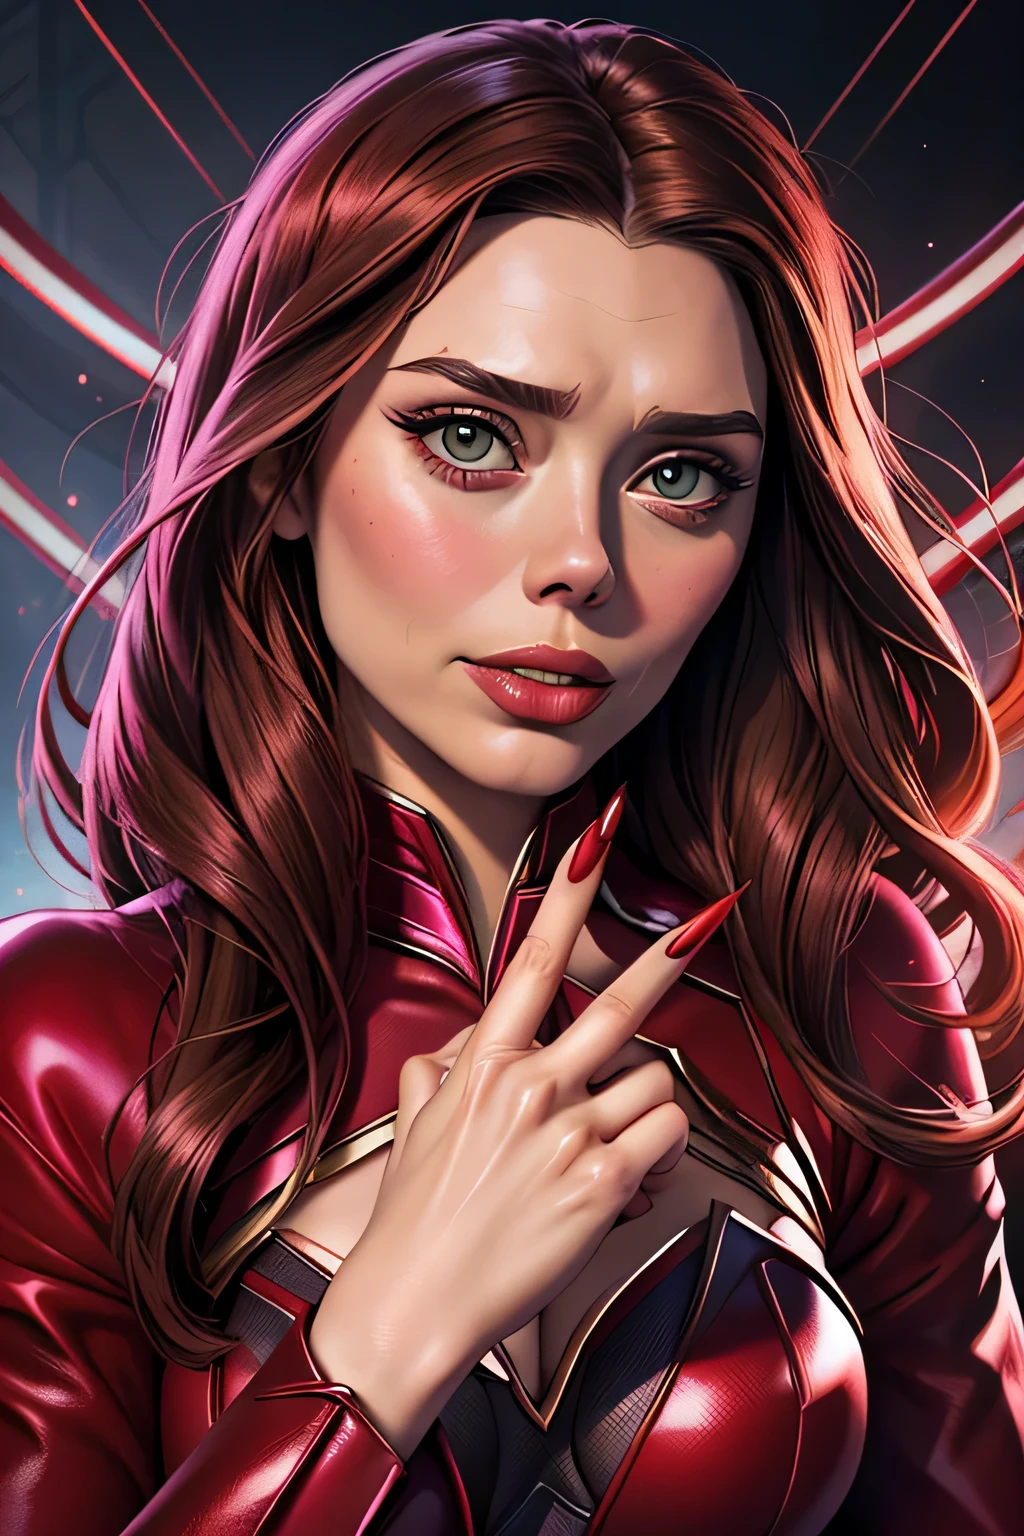 ((Highest quality)), ((masterpiece)), (Familiar), ((Elizabeth Olsen)), ((Scarlet Witch)), Perfect Face、detailed、(Accurate hand and finger depiction)、(Accurate lip drawing)、(Accurate tongue depiction)、 Scarlet witch woman、Beautiful nails、Black nail polish、 (I&#39;m crawling on my stomach:1.5)、Browsing Caution, Vaginal intercourse, Woman standing on top, Real Vagina, Anal Sex, Real Anal, (Crying face:1.4)、Half an eye、blush、Open your mouth、(sweating:1.1)、Voluptuous body、Large Breasts、Tight waist、Big Ass、Fascinating、glamorous、Cinematic, (Complex:1.4), Low contrast、Side lighting, Best Shadow, (View from the front)、(In the deep dark forest)、(Autumn leaves on tree々Surrounded by)、(The ground is covered with leaves and tree roots..)、(vapor:1.3)、Browsing Caution, penis、(With projectile:1.4), (Excessive ejaculation:1.5)、((2penis:1.2)), (2. The penis grows out of the ground.1.3)